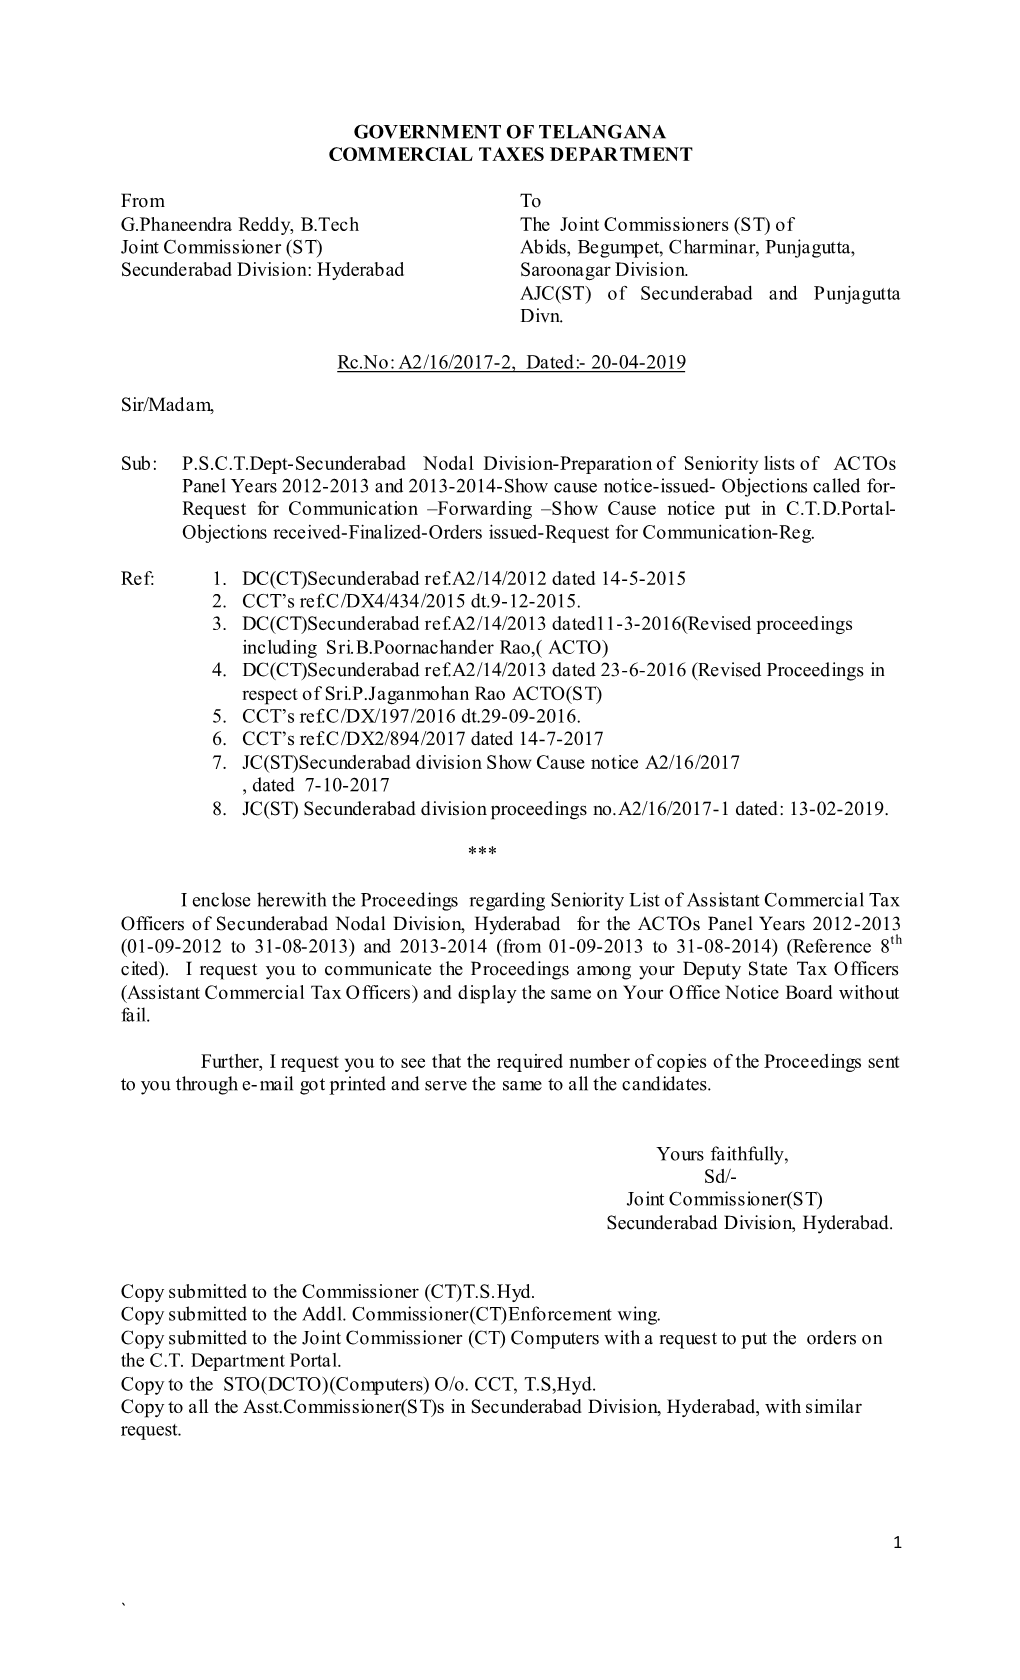 Government of Telangana Commercial Taxes Department